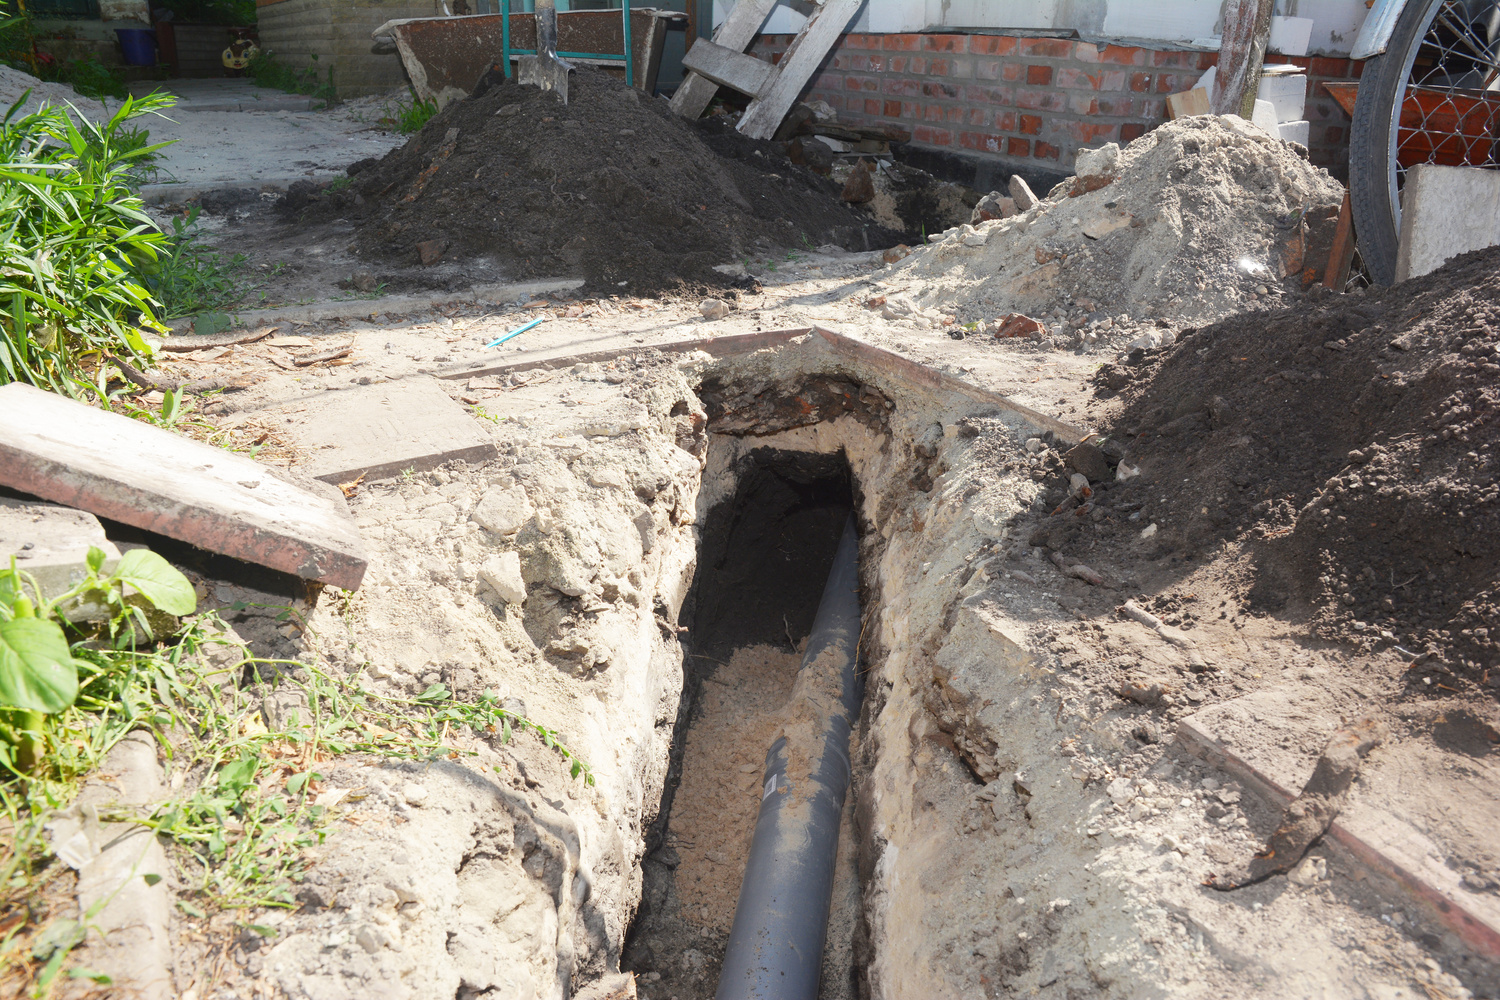 Digging a trench for the main drain pipe, sewer line to a sewer or septic tank. Sewer line replacement or repair.